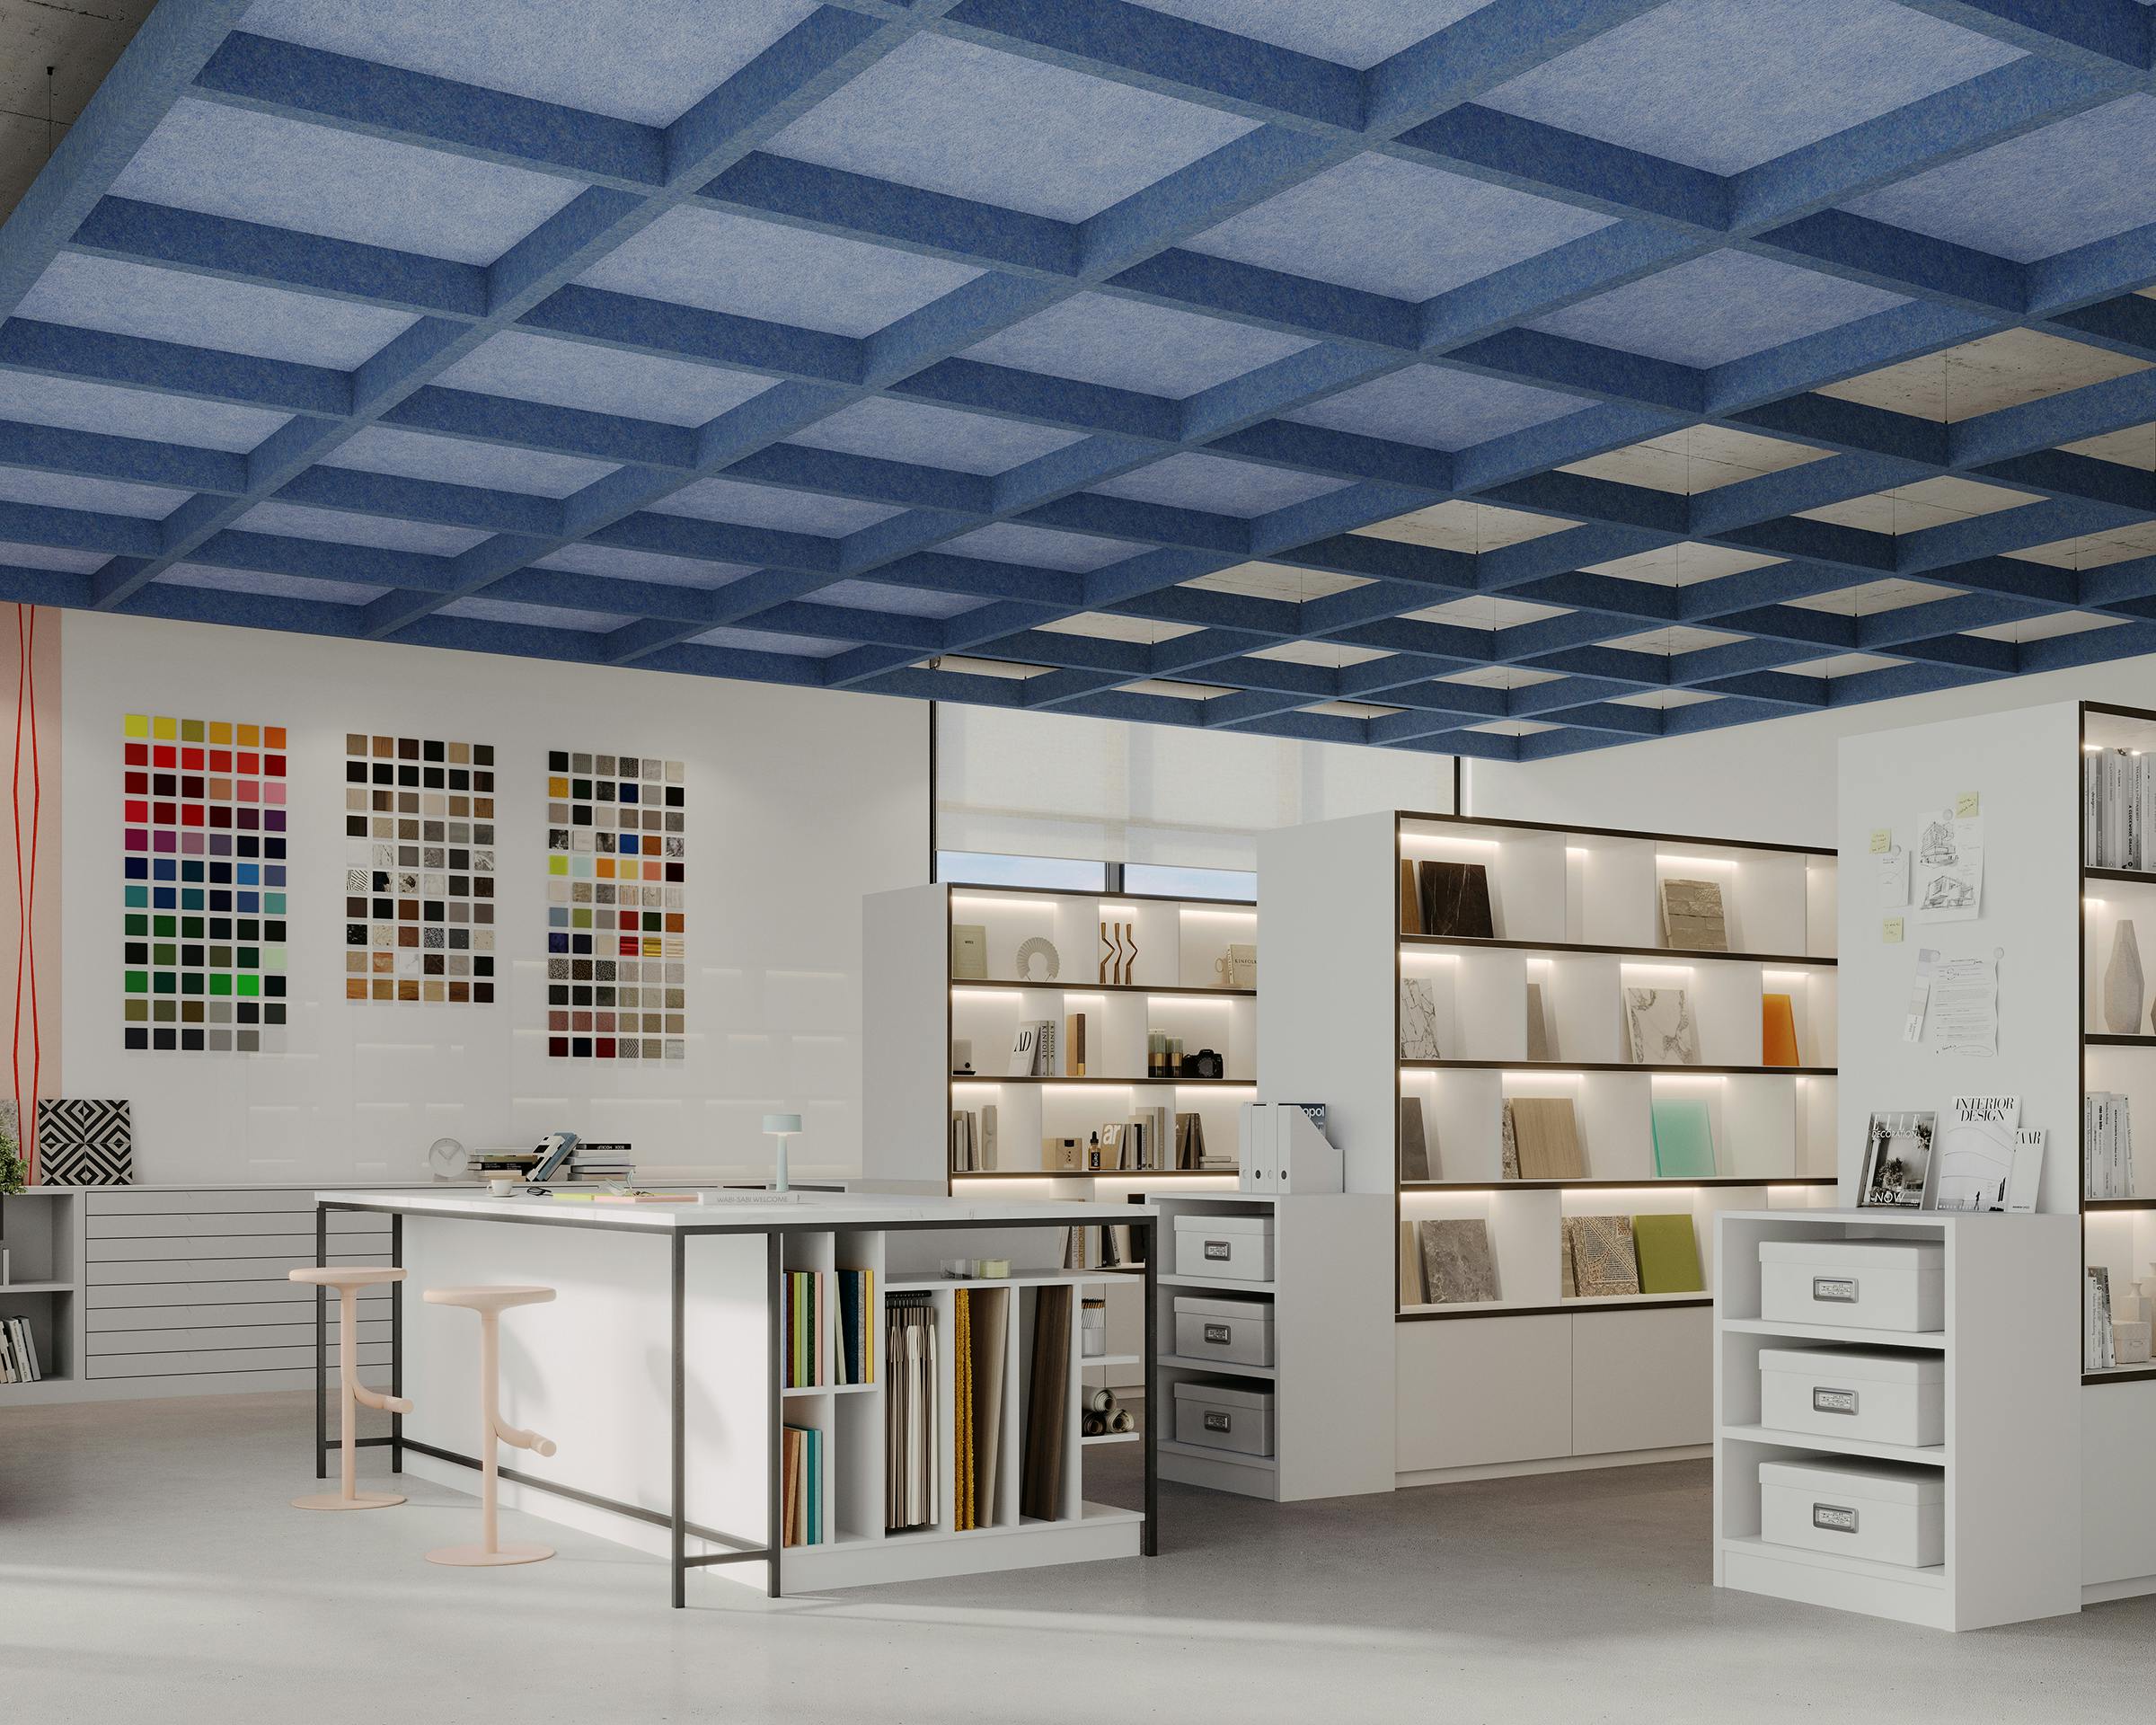 A modern interior design studio with white walls, ergonomic furniture, and a blue grid capped ceiling. The room features color swatch samples on the wall, shelving units with books and design materials, a large worktable with stools, and drawers for storage.